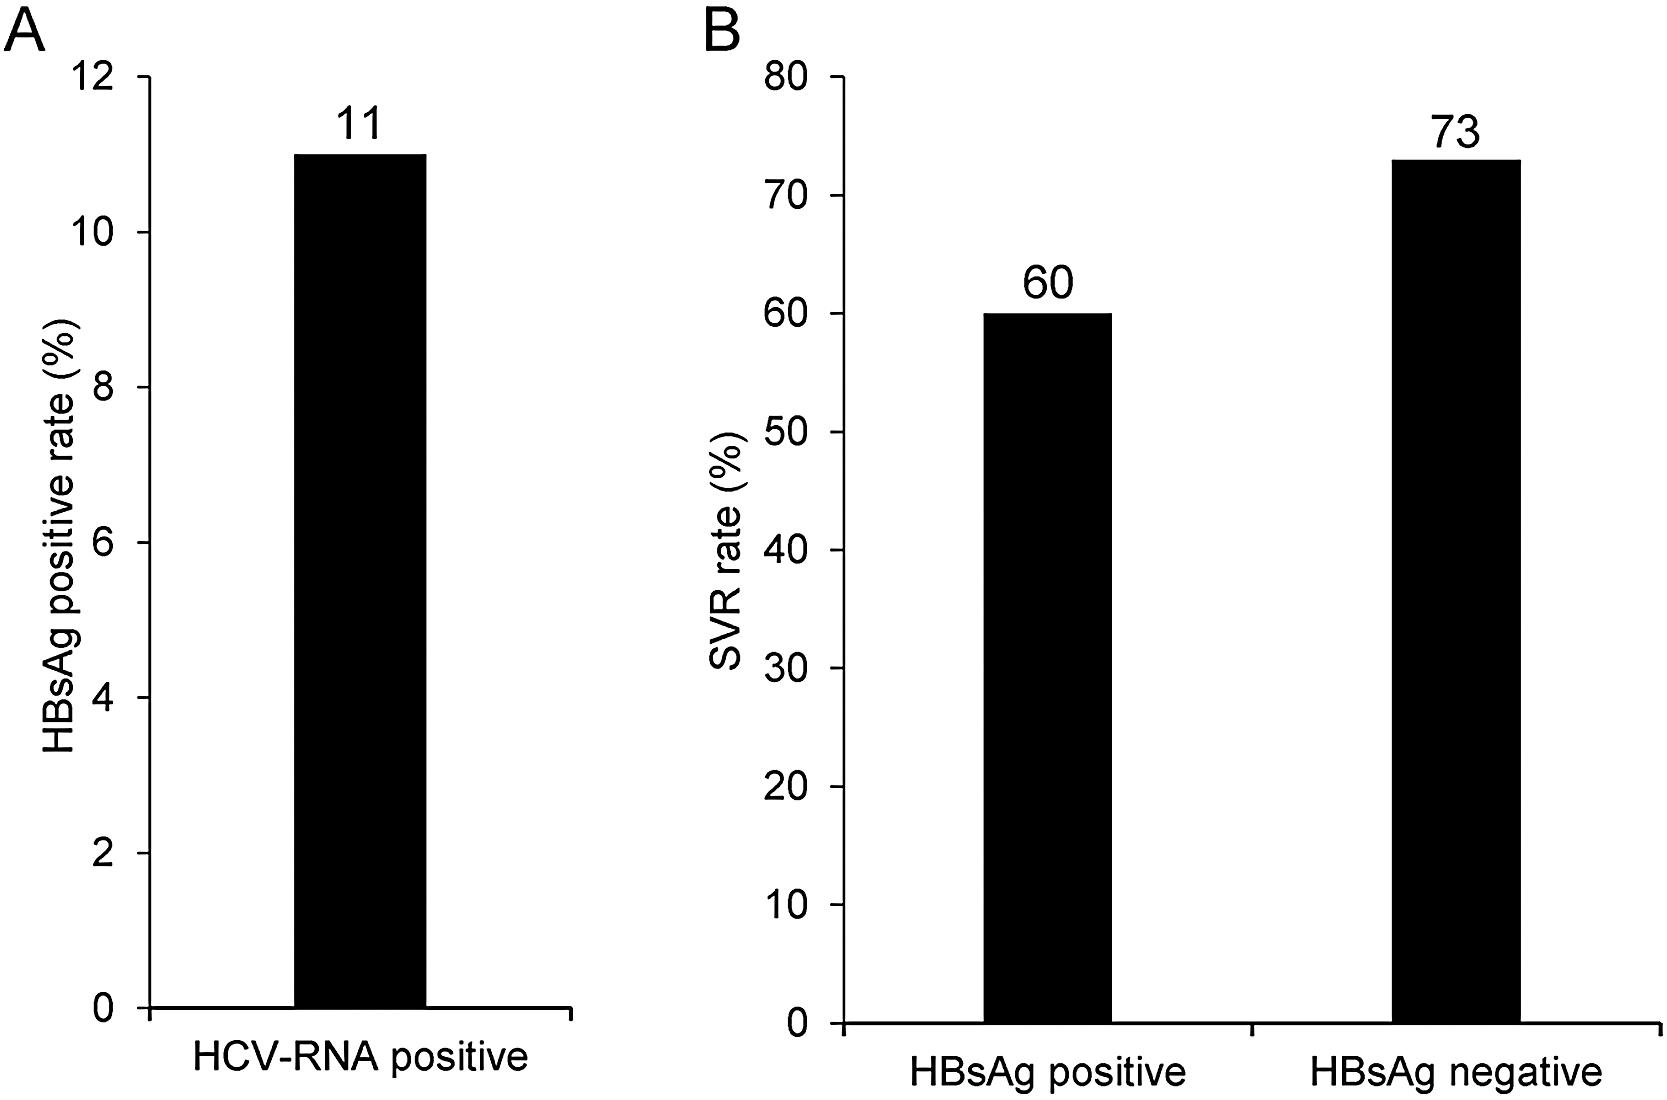 Prevalence of HBsAg-positive (A) and the SVR rate of P/R treatment between HBsAg-positive and -negative groups (B) in HCV-infected patients.